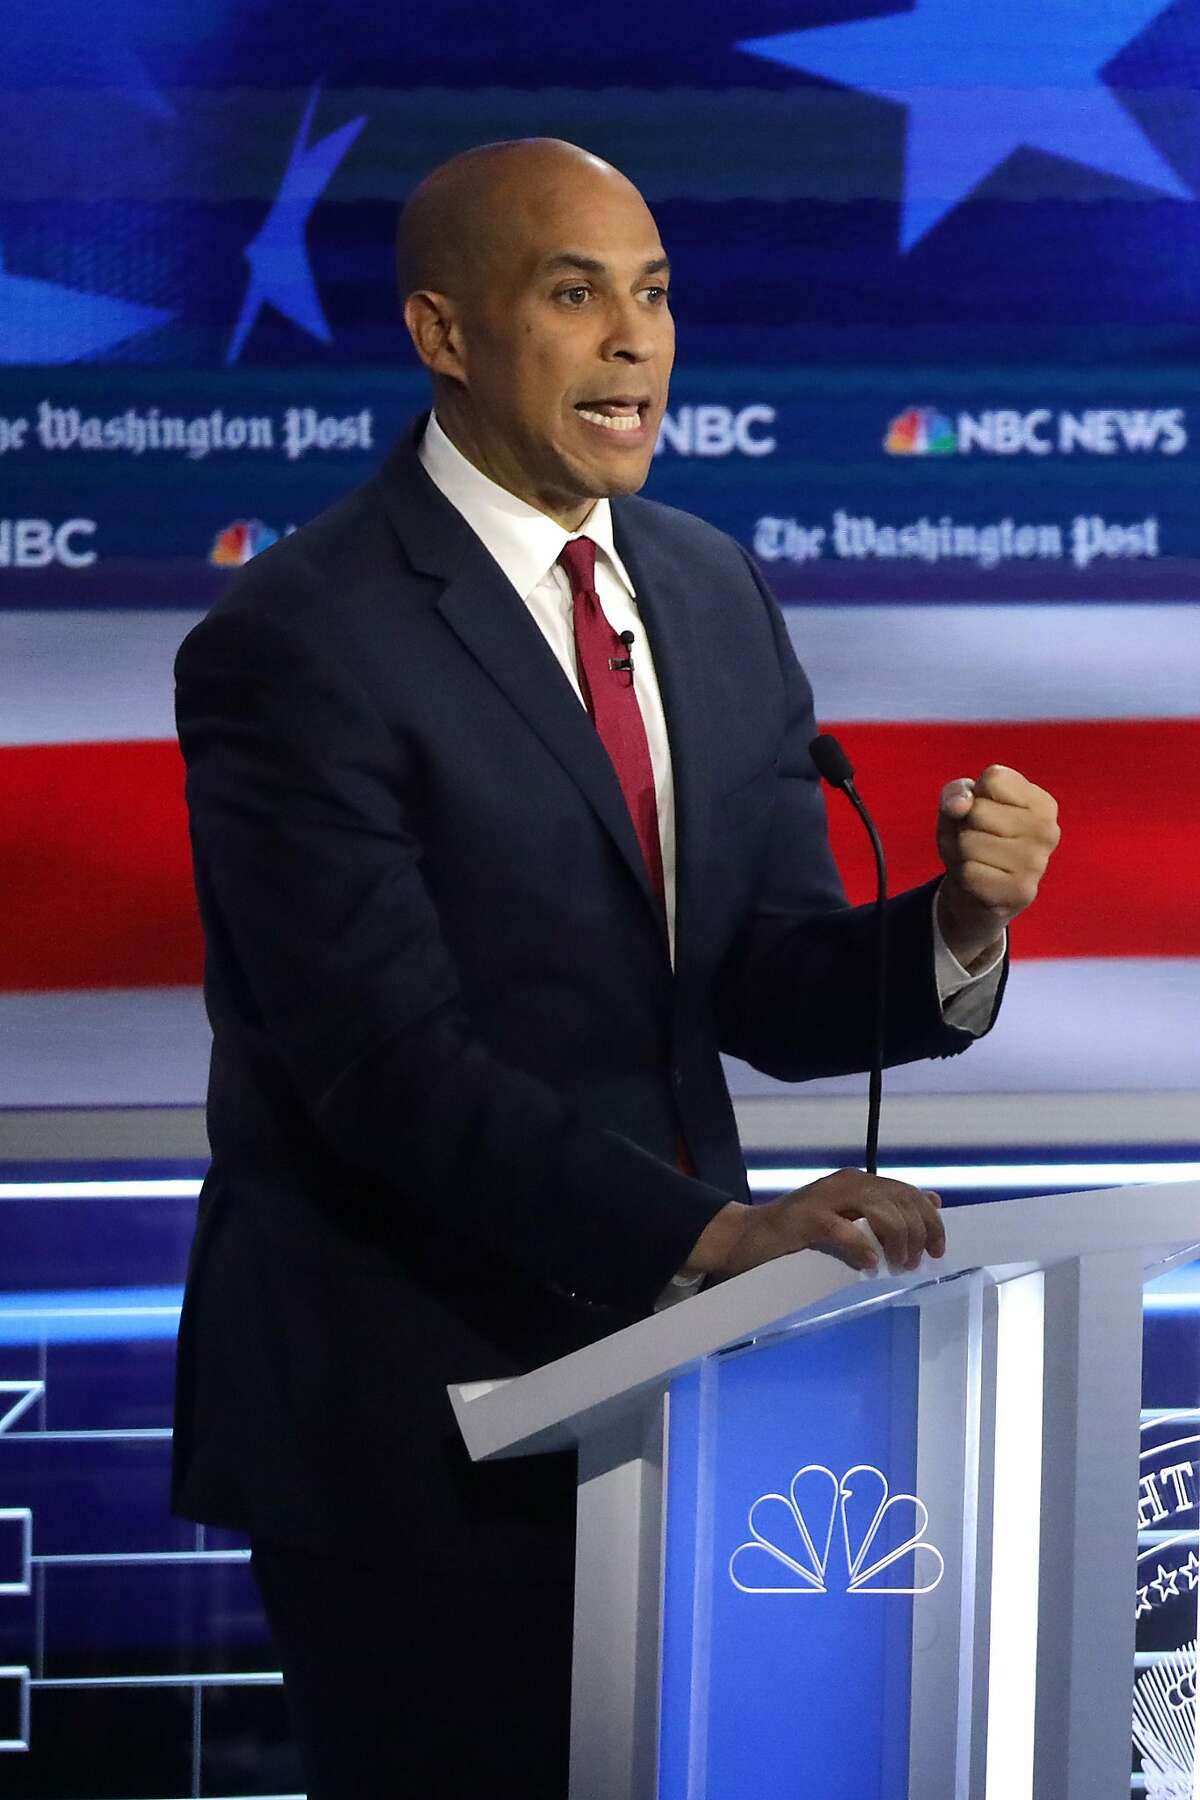 ATLANTA, GEORGIA - NOVEMBER 20: Democratic presidential candidate Sen. Cory Booker (D-NJ) speaks during the Democratic Presidential Debate at Tyler Perry Studios November 20, 2019 in Atlanta, Georgia. Ten Democratic presidential hopefuls were chosen from the larger field of candidates to participate in the debate hosted by MSNBC and The Washington Post. (Photo by Alex Wong/Getty Images)